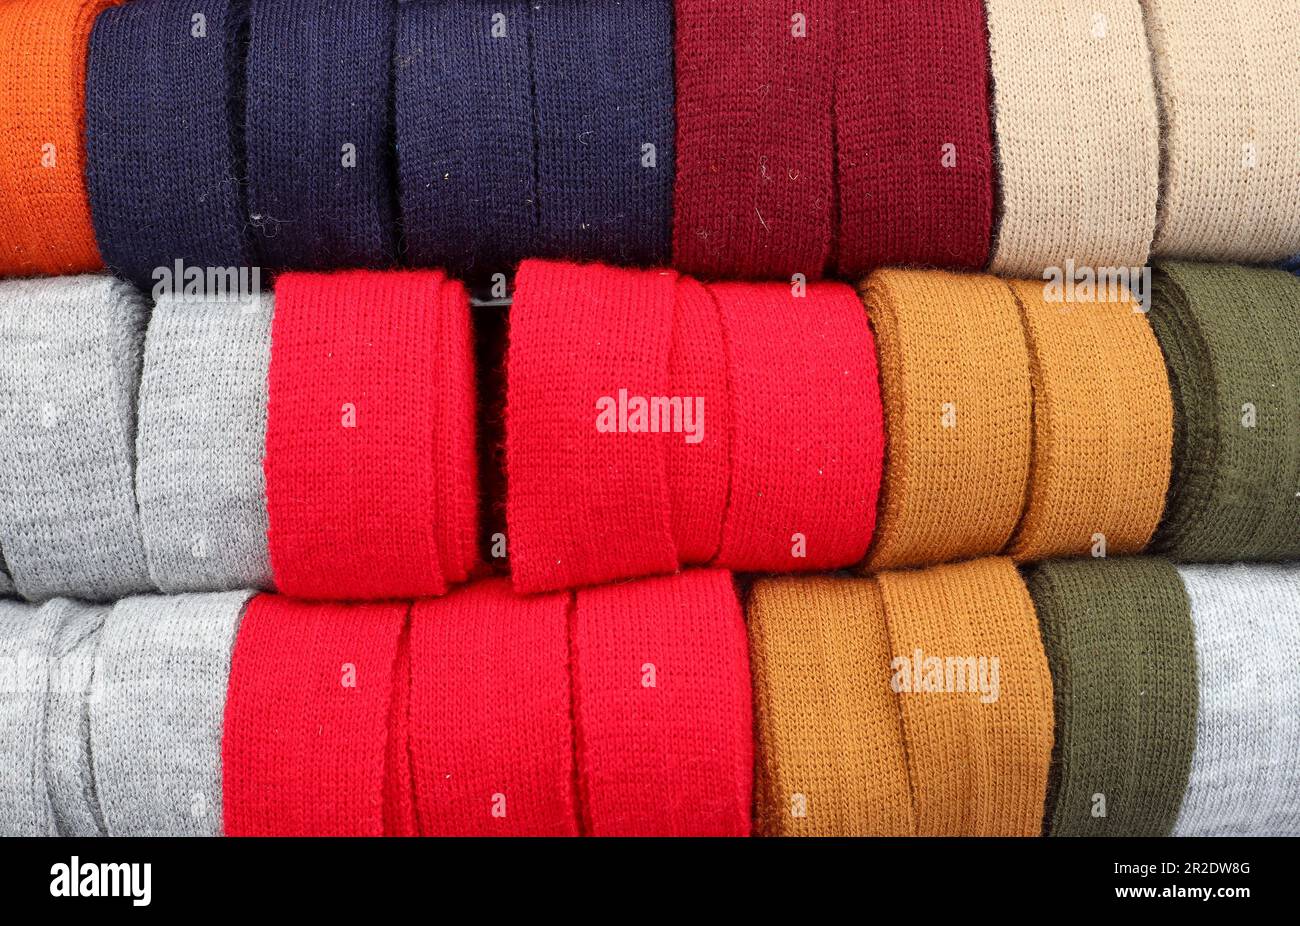 Samples of cloth and fabrics in different colors found at a fabrics market. Stock Photo